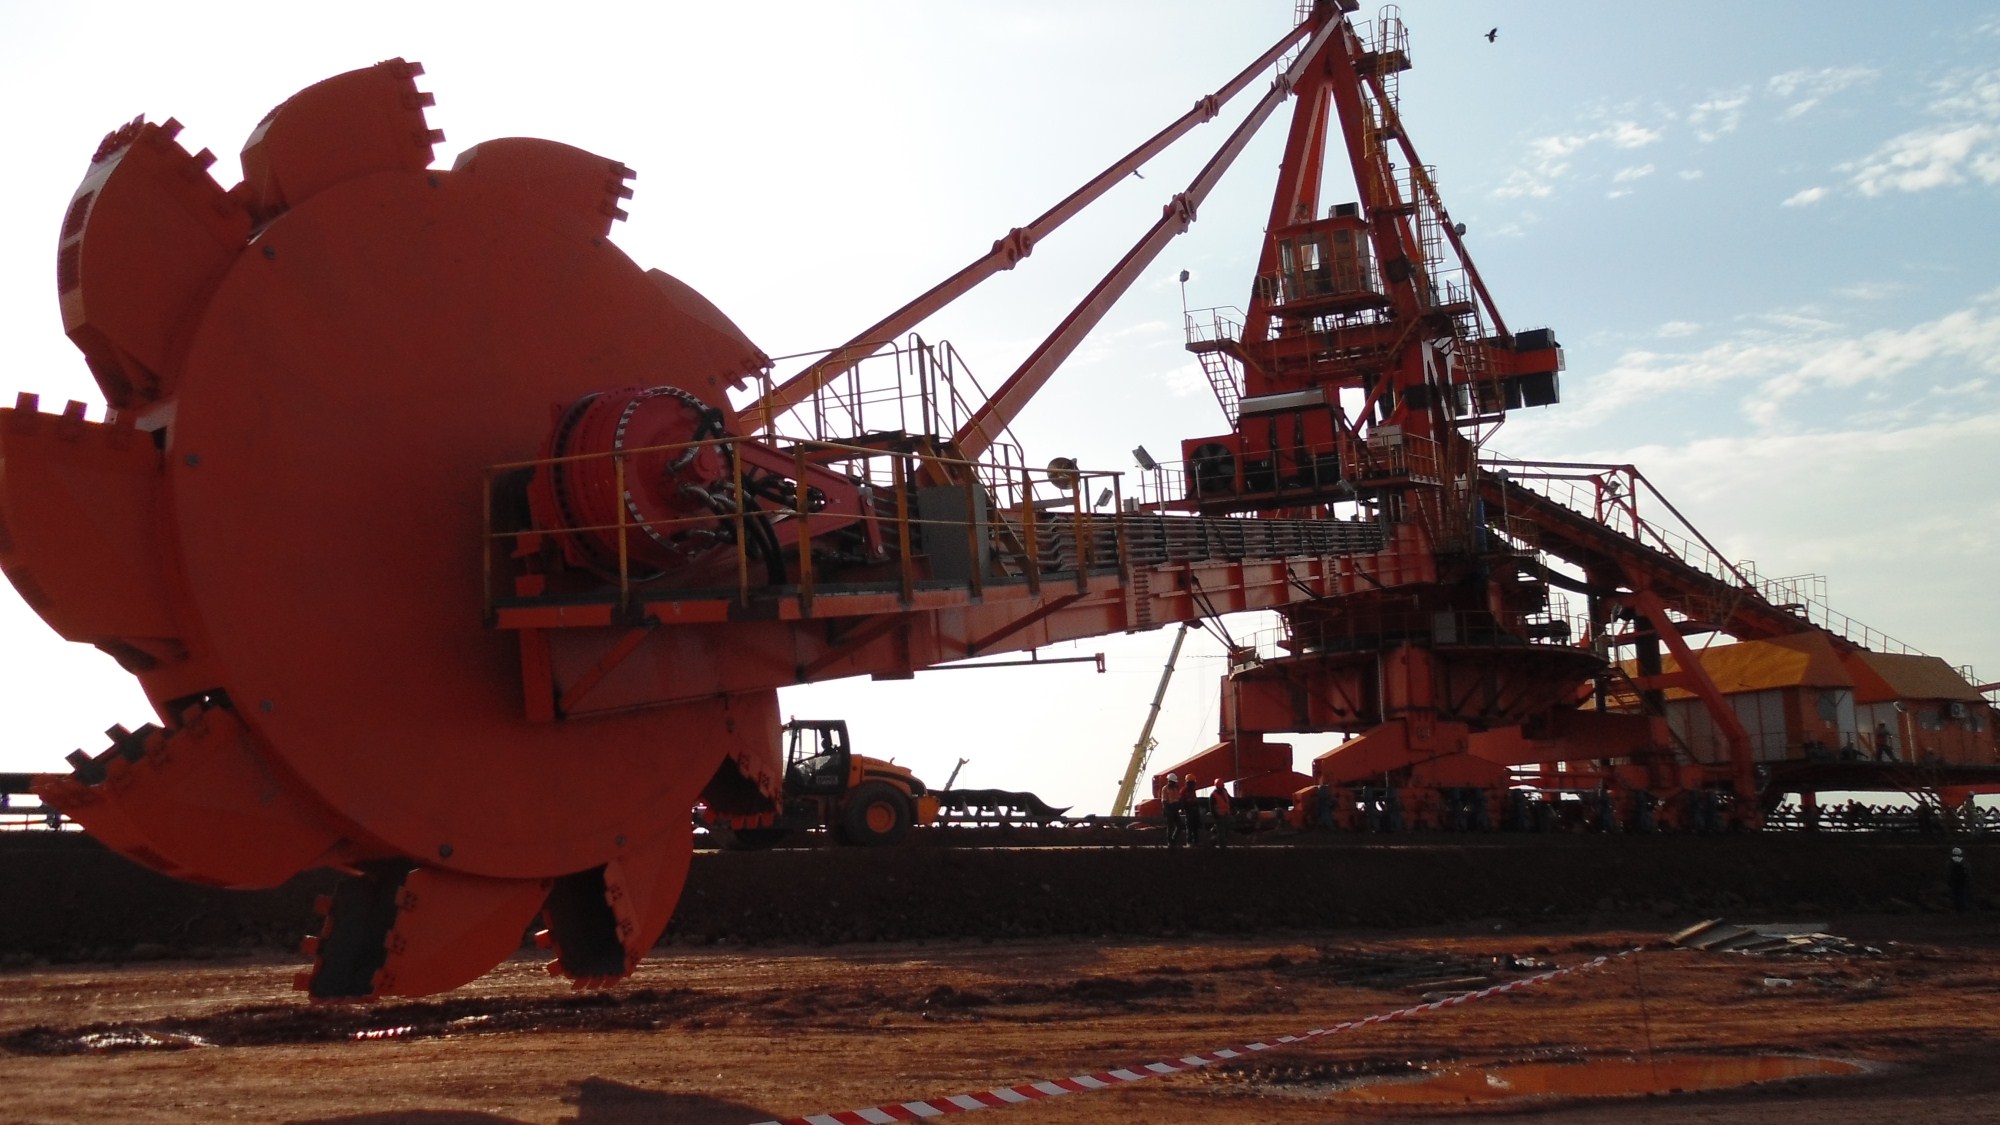 The professional Boom type bucket wheel S&R manufacturer